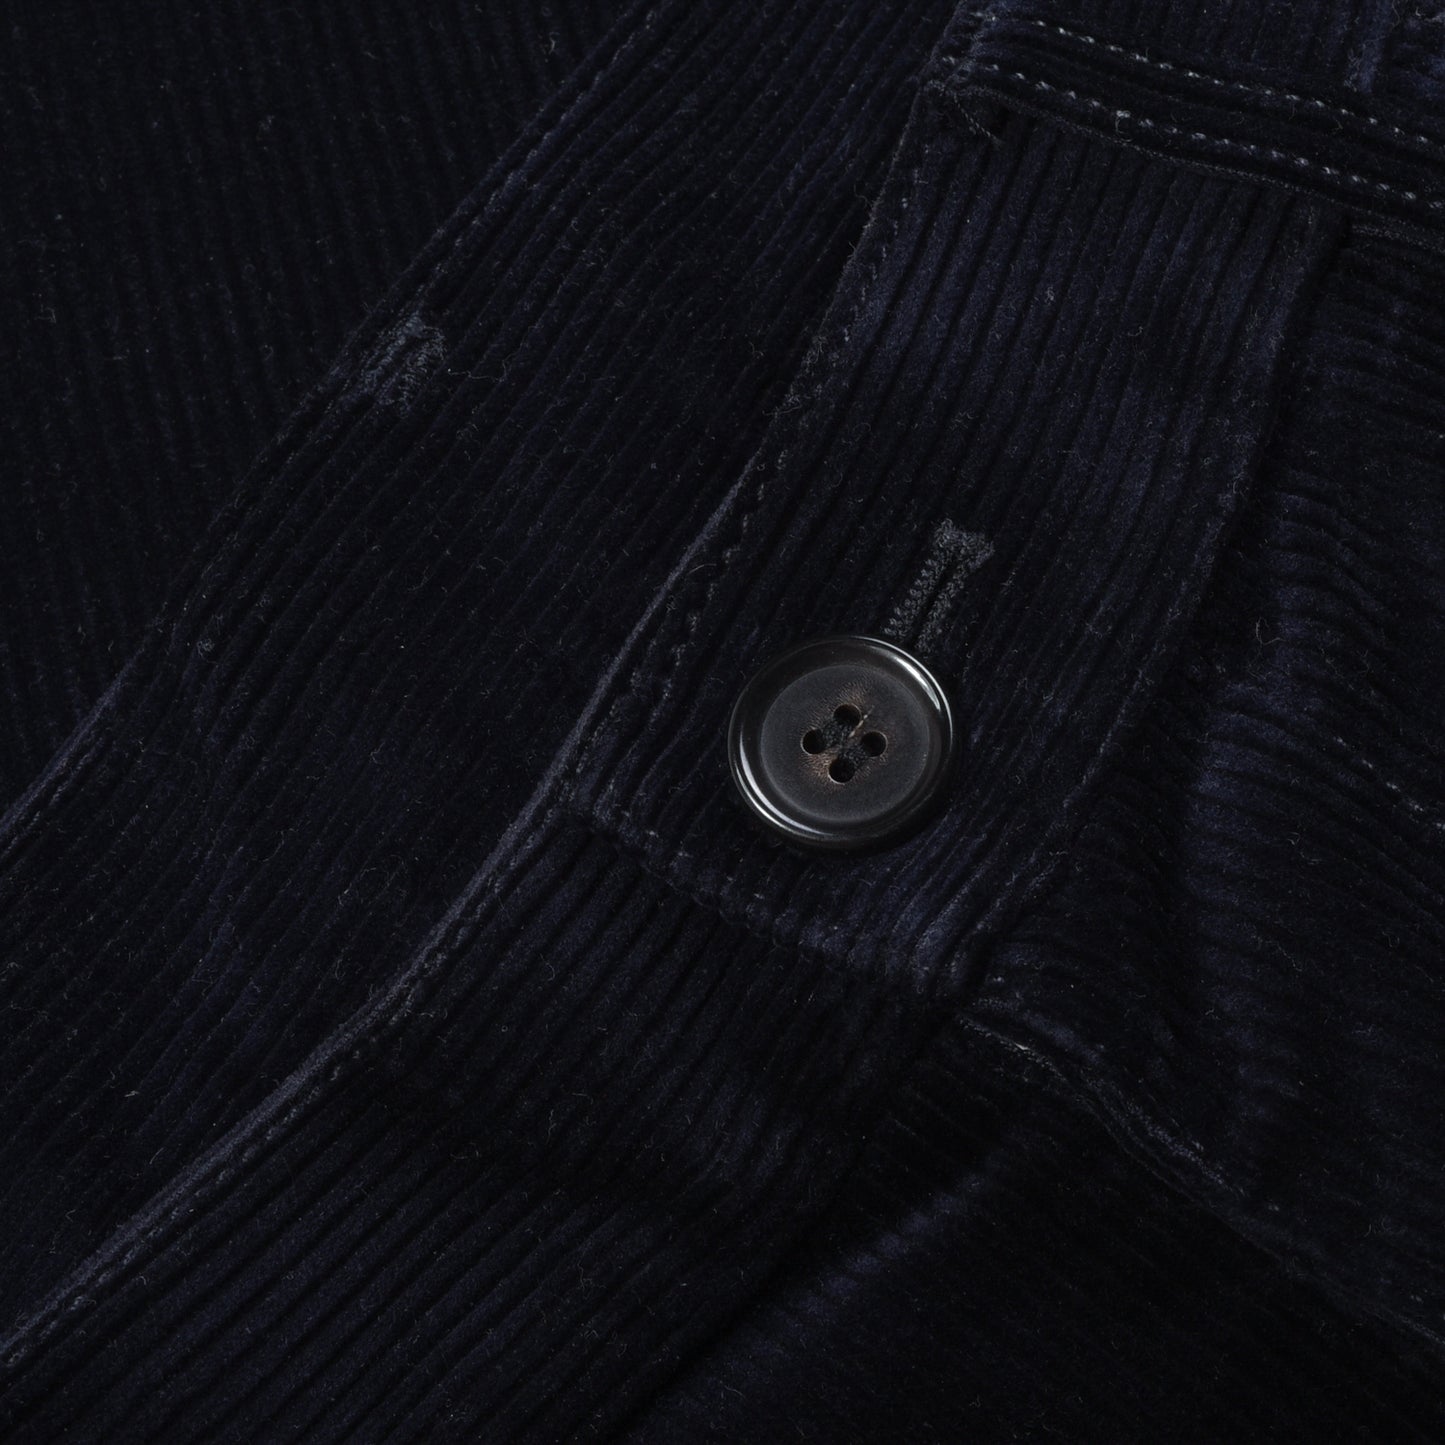 USED COMMES DES GARCONS CORDS - DEEP NAVY